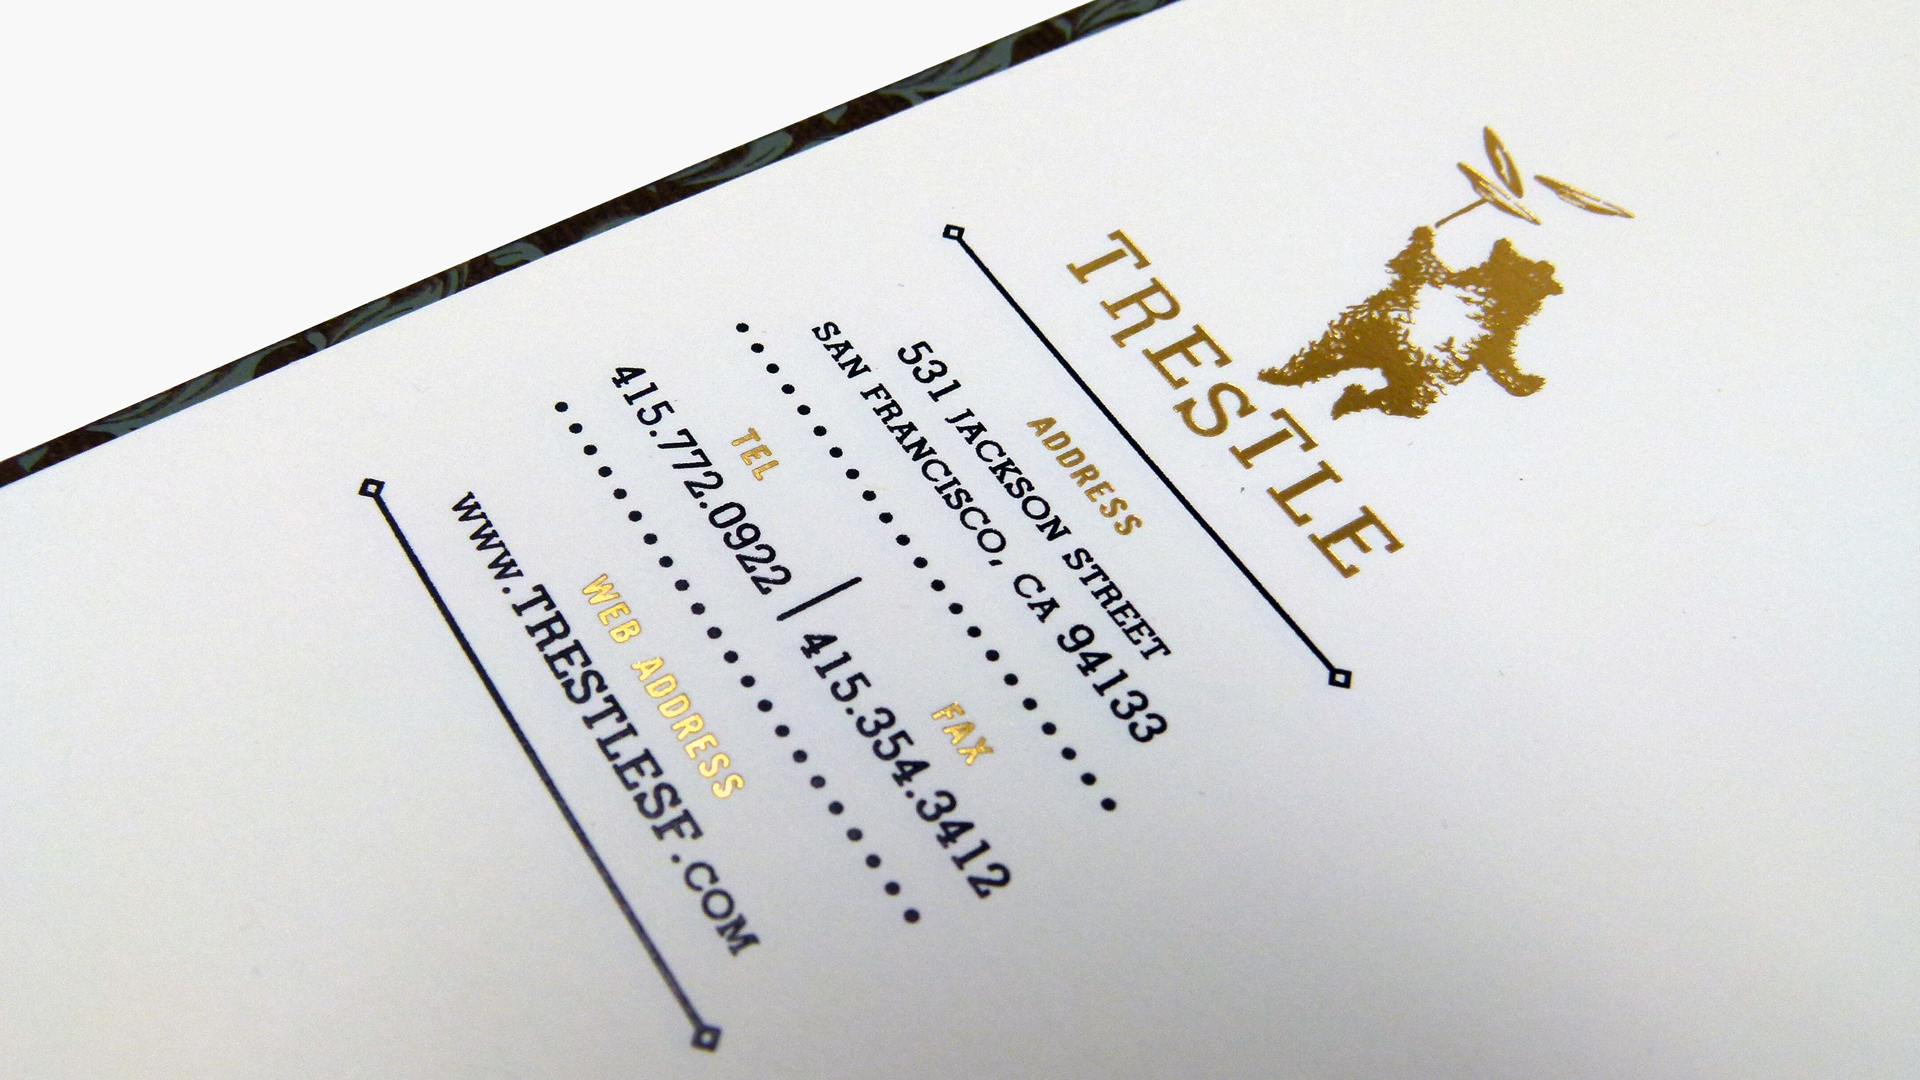 Trestle Restaurant Menus and Business Cards - PaperSpecs